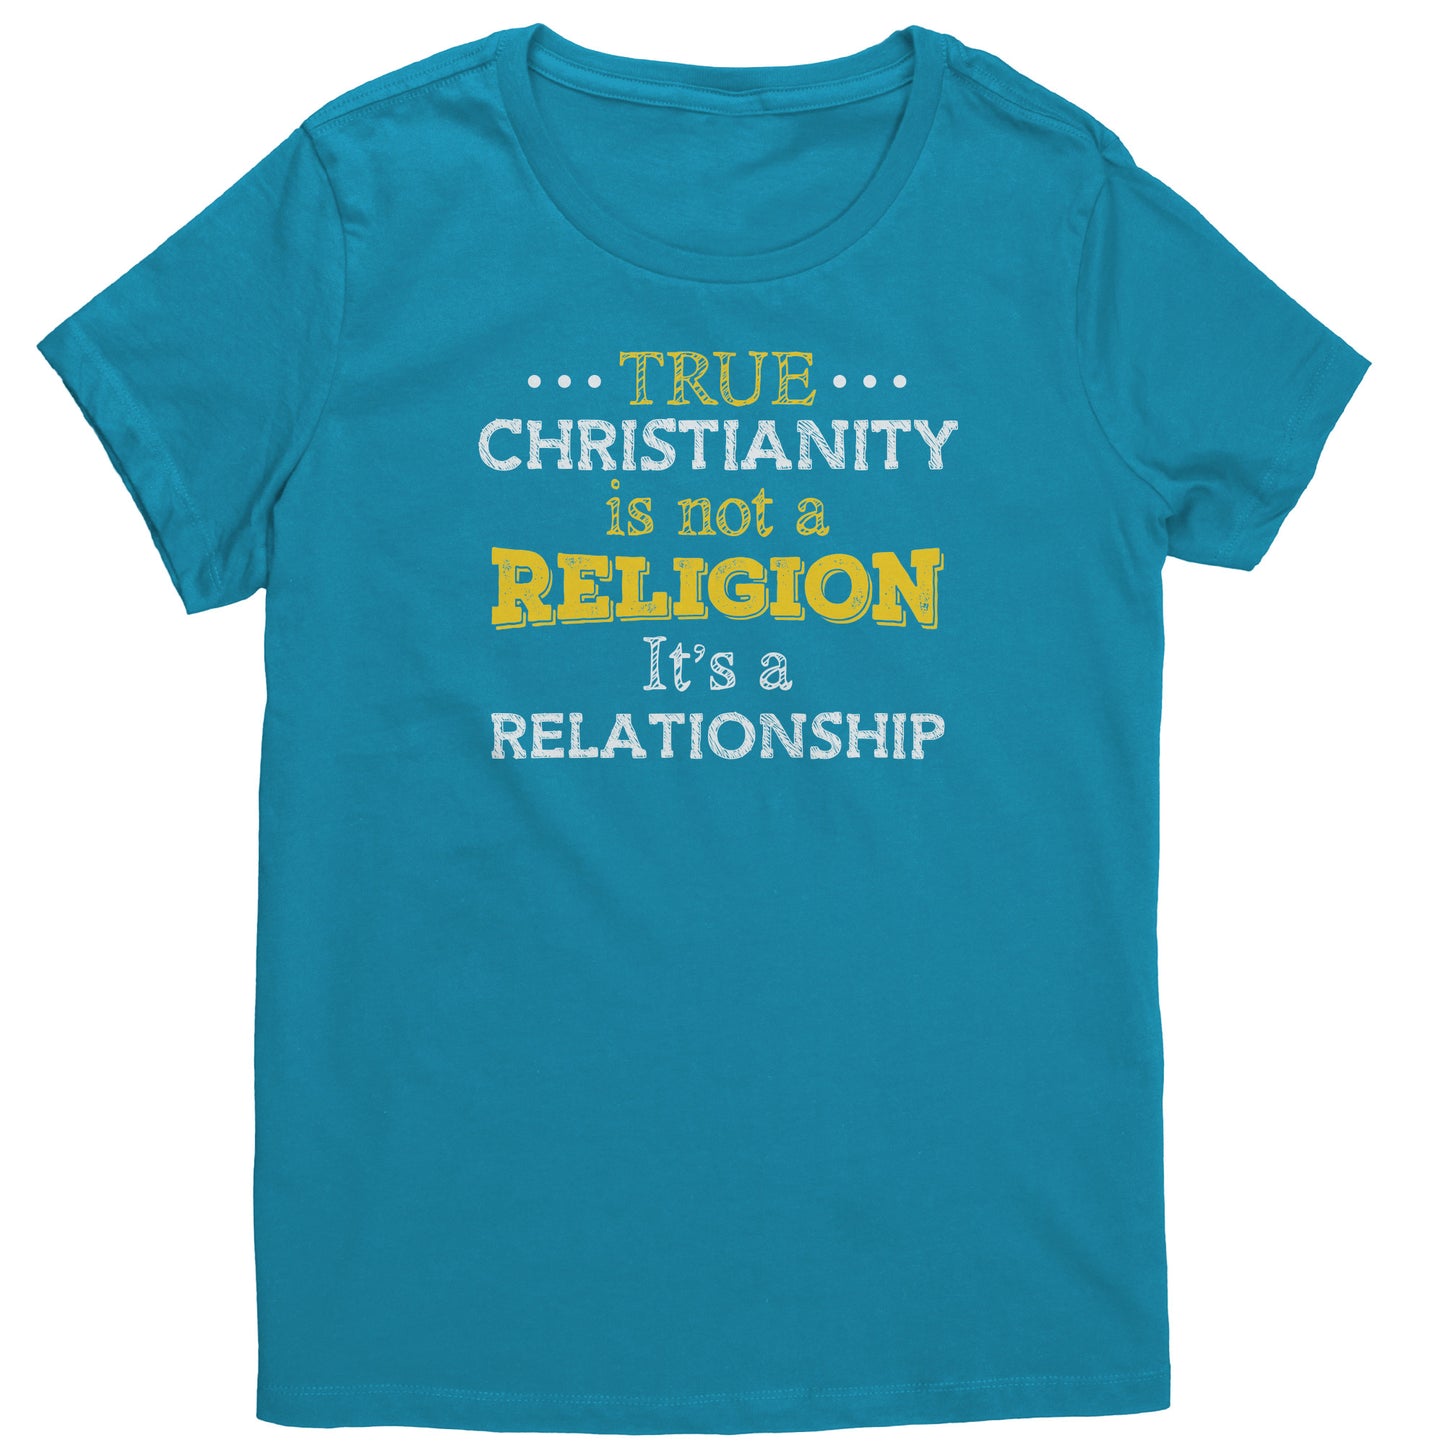 True Christianity Is Not A Religion But A Relationship Women's T-Shirt Part 1